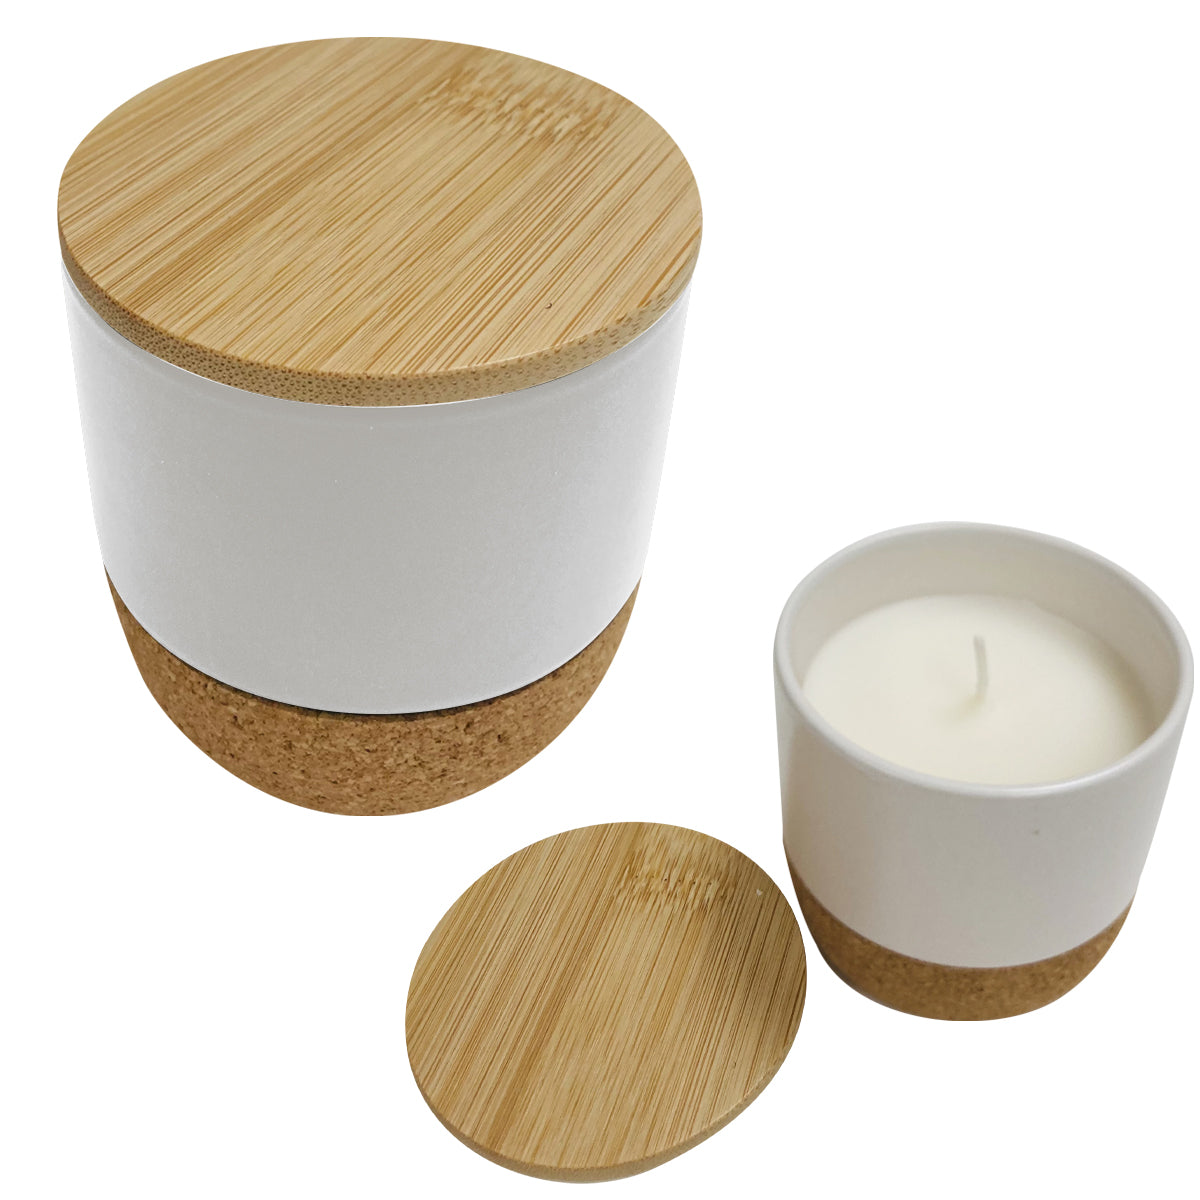 Santal Soy Wax Candle - Vanilla Scent in white.